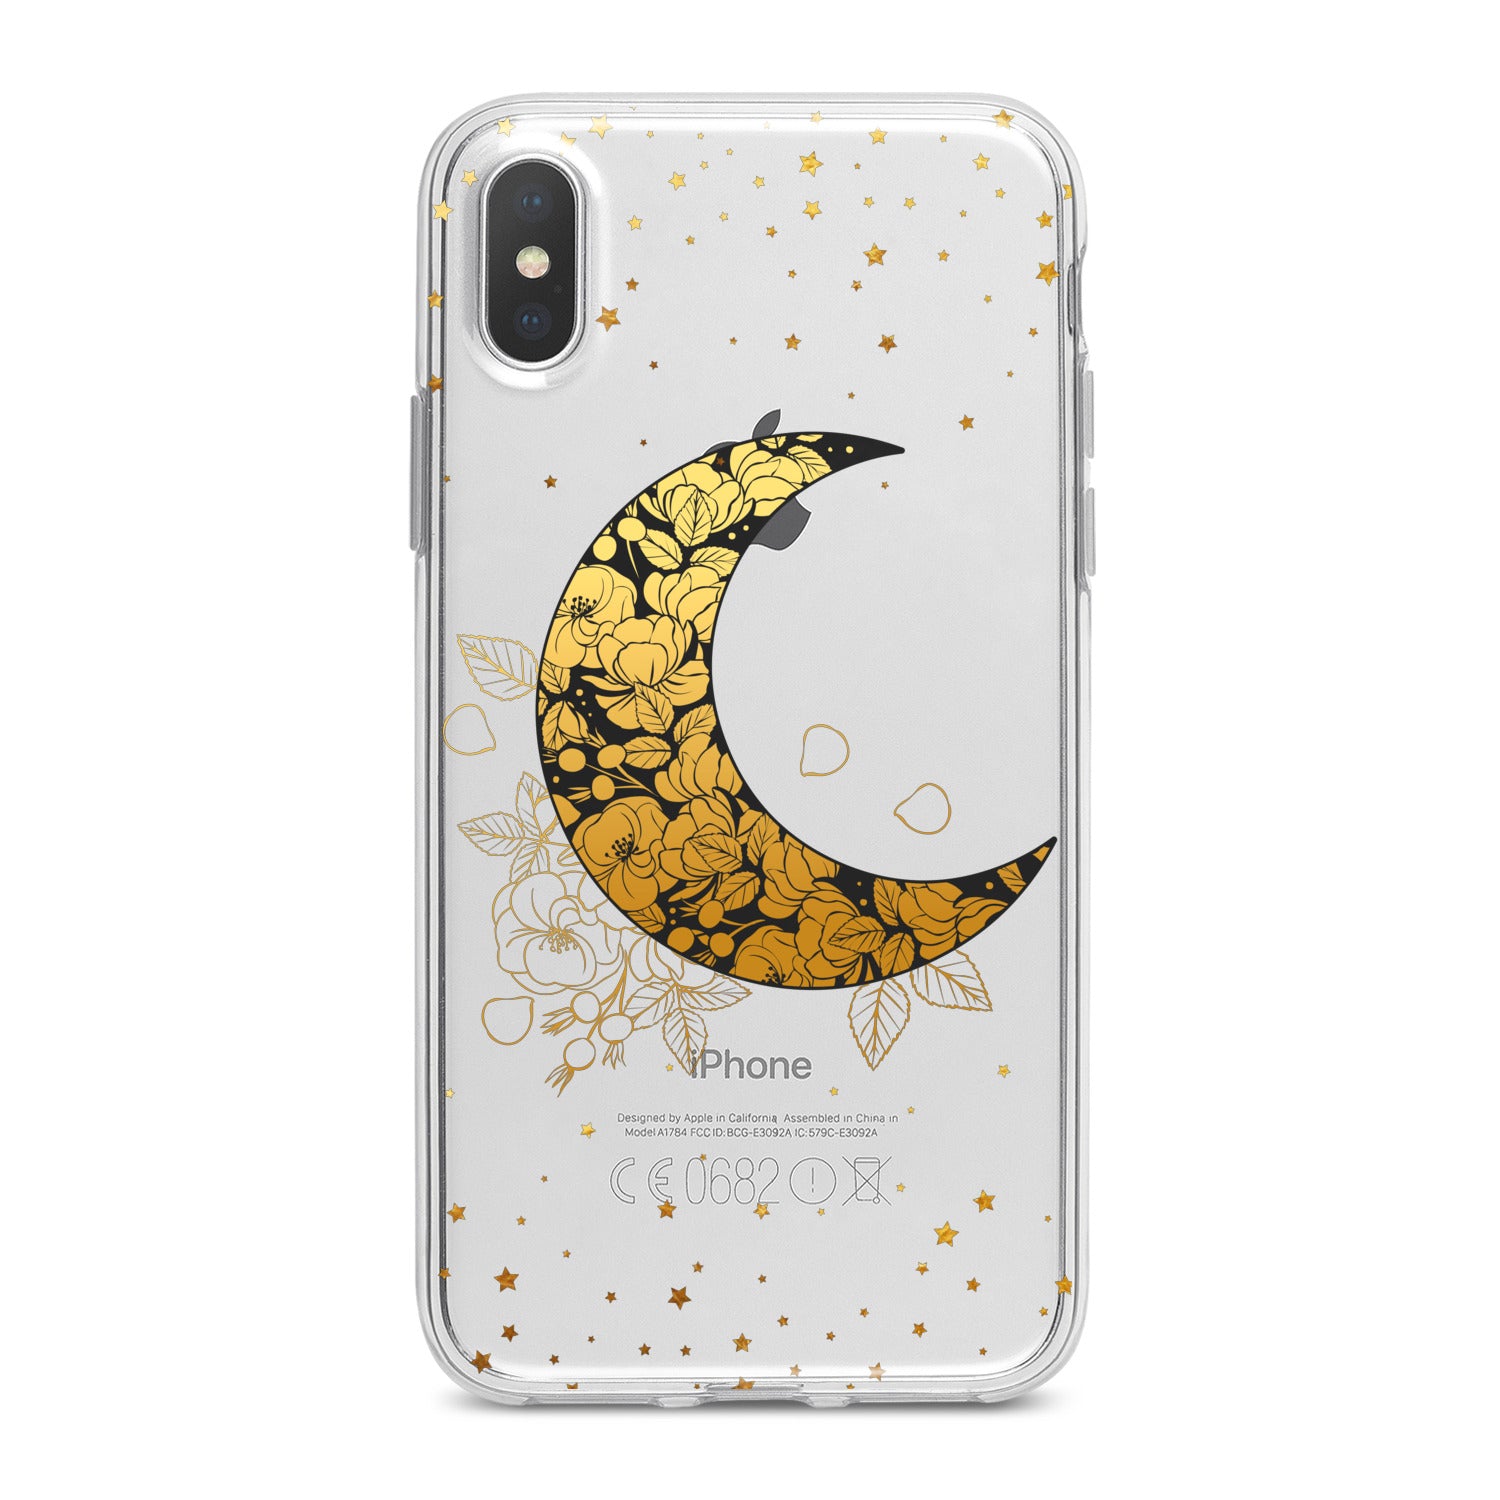 Lex Altern Golden Floral Moon Phone Case for your iPhone & Android phone.